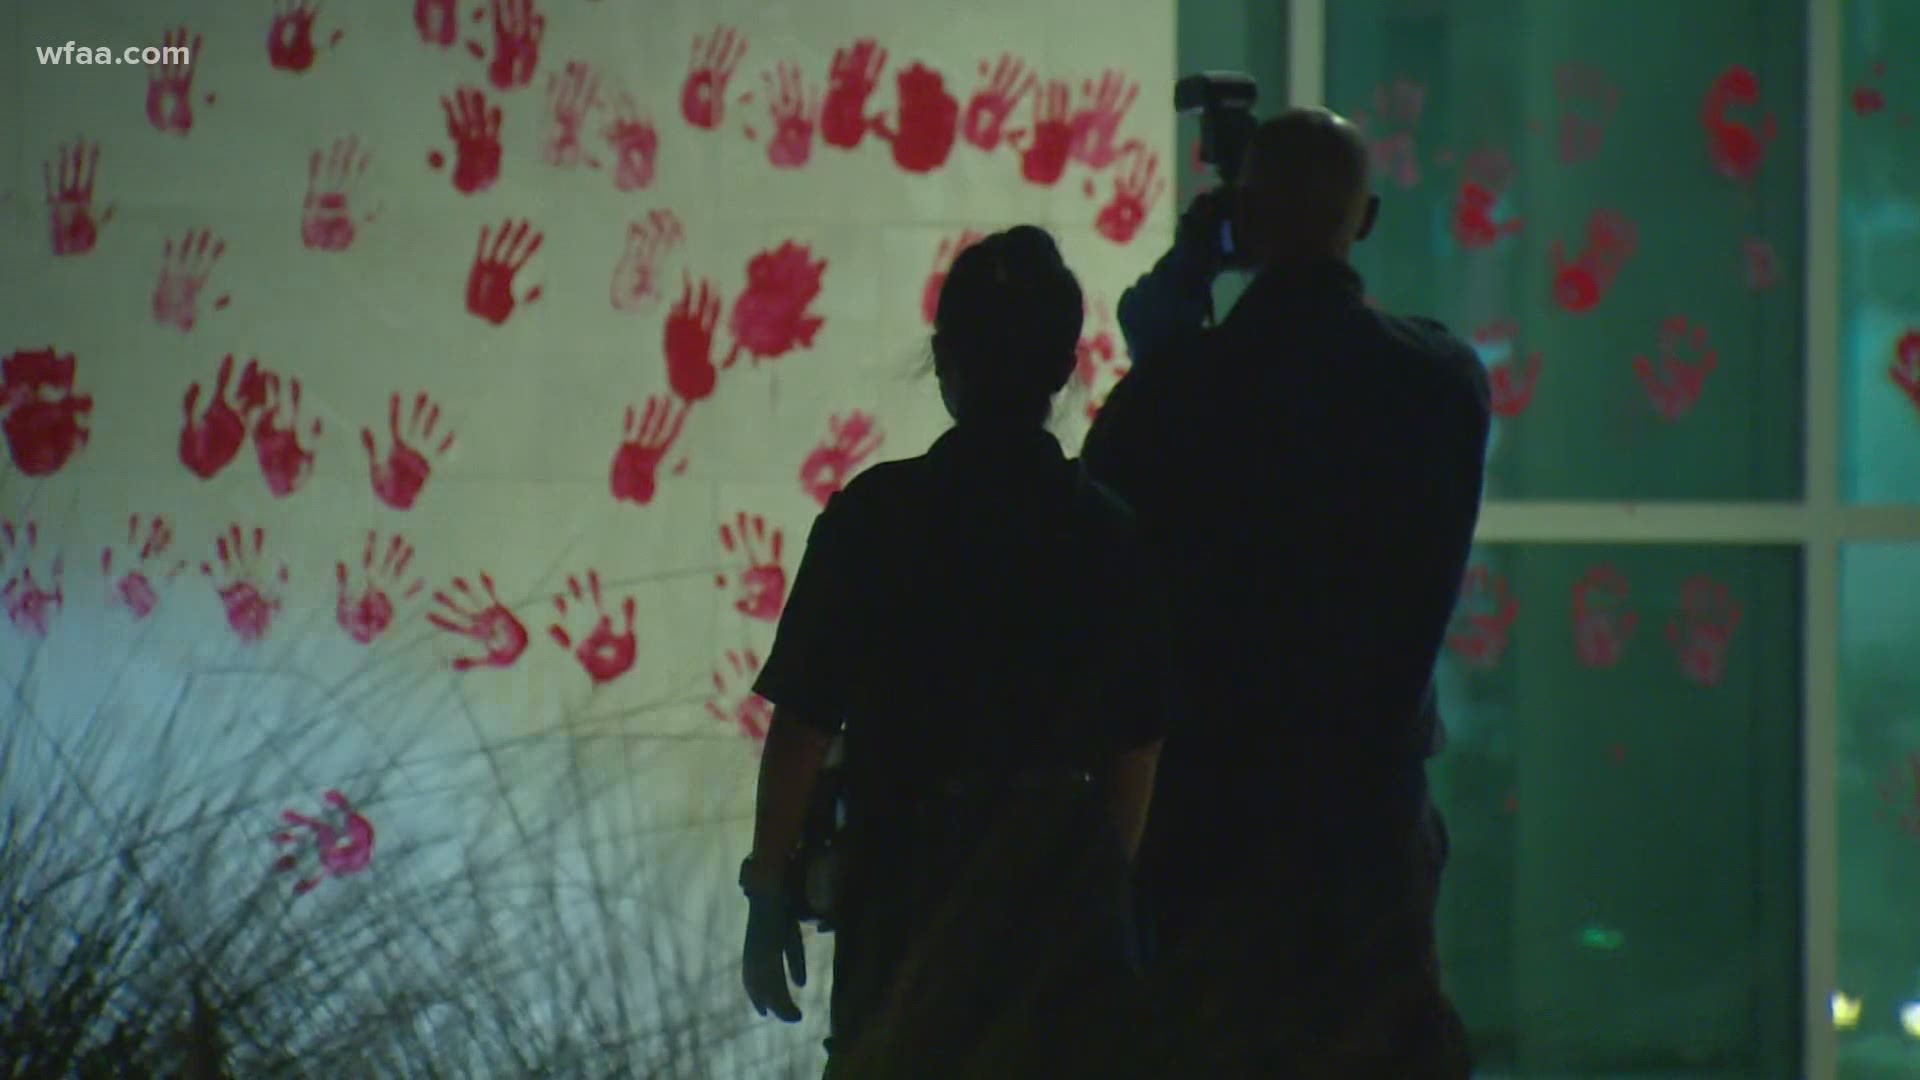 After a protest outside the headquarters of the Dallas Police Department, red handprints were found on the building. Two people were detained and then released.